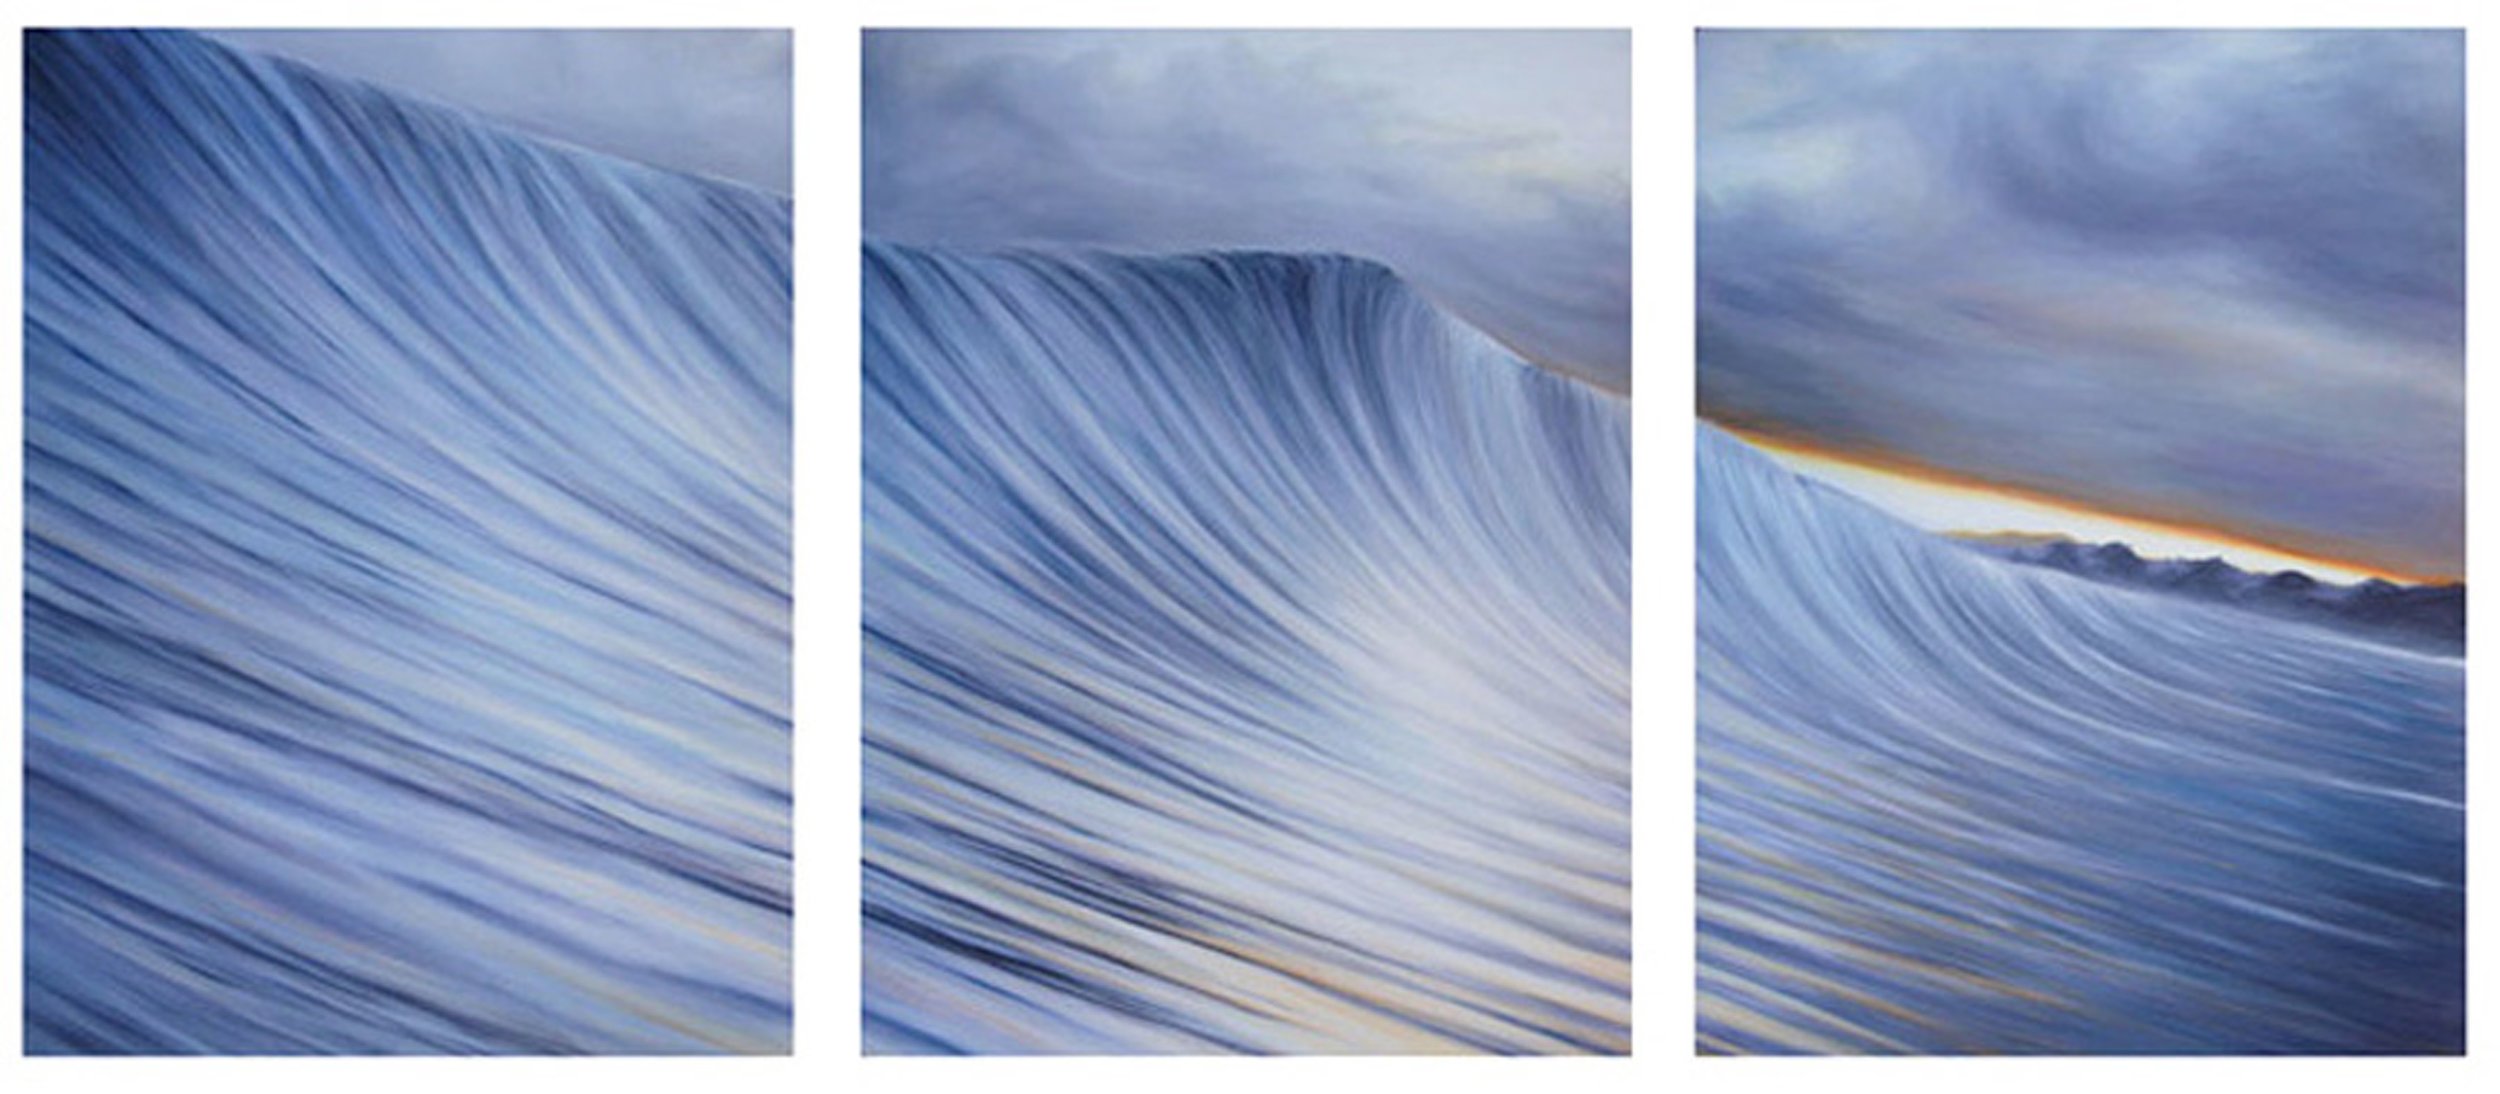   Oil on Canvas    48"x108"    Original-Sold    Prints Available     